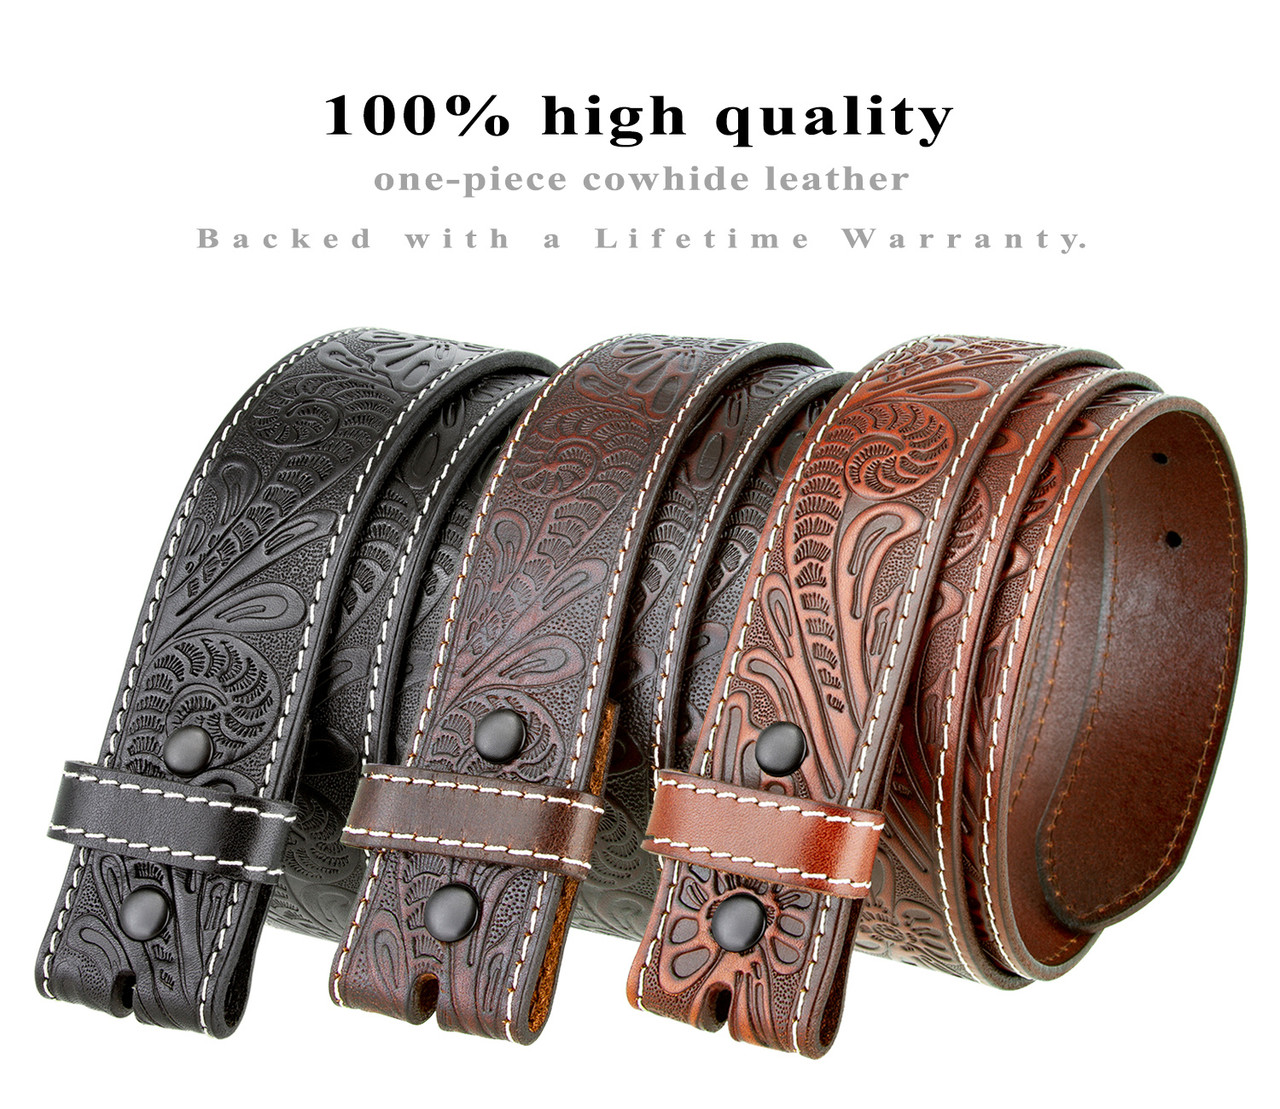 BS118 Genuine Full Grain Western Floral Engraved Tooled Leather Belt Strap  with Snaps on 1-1/2(38mm) Wide 